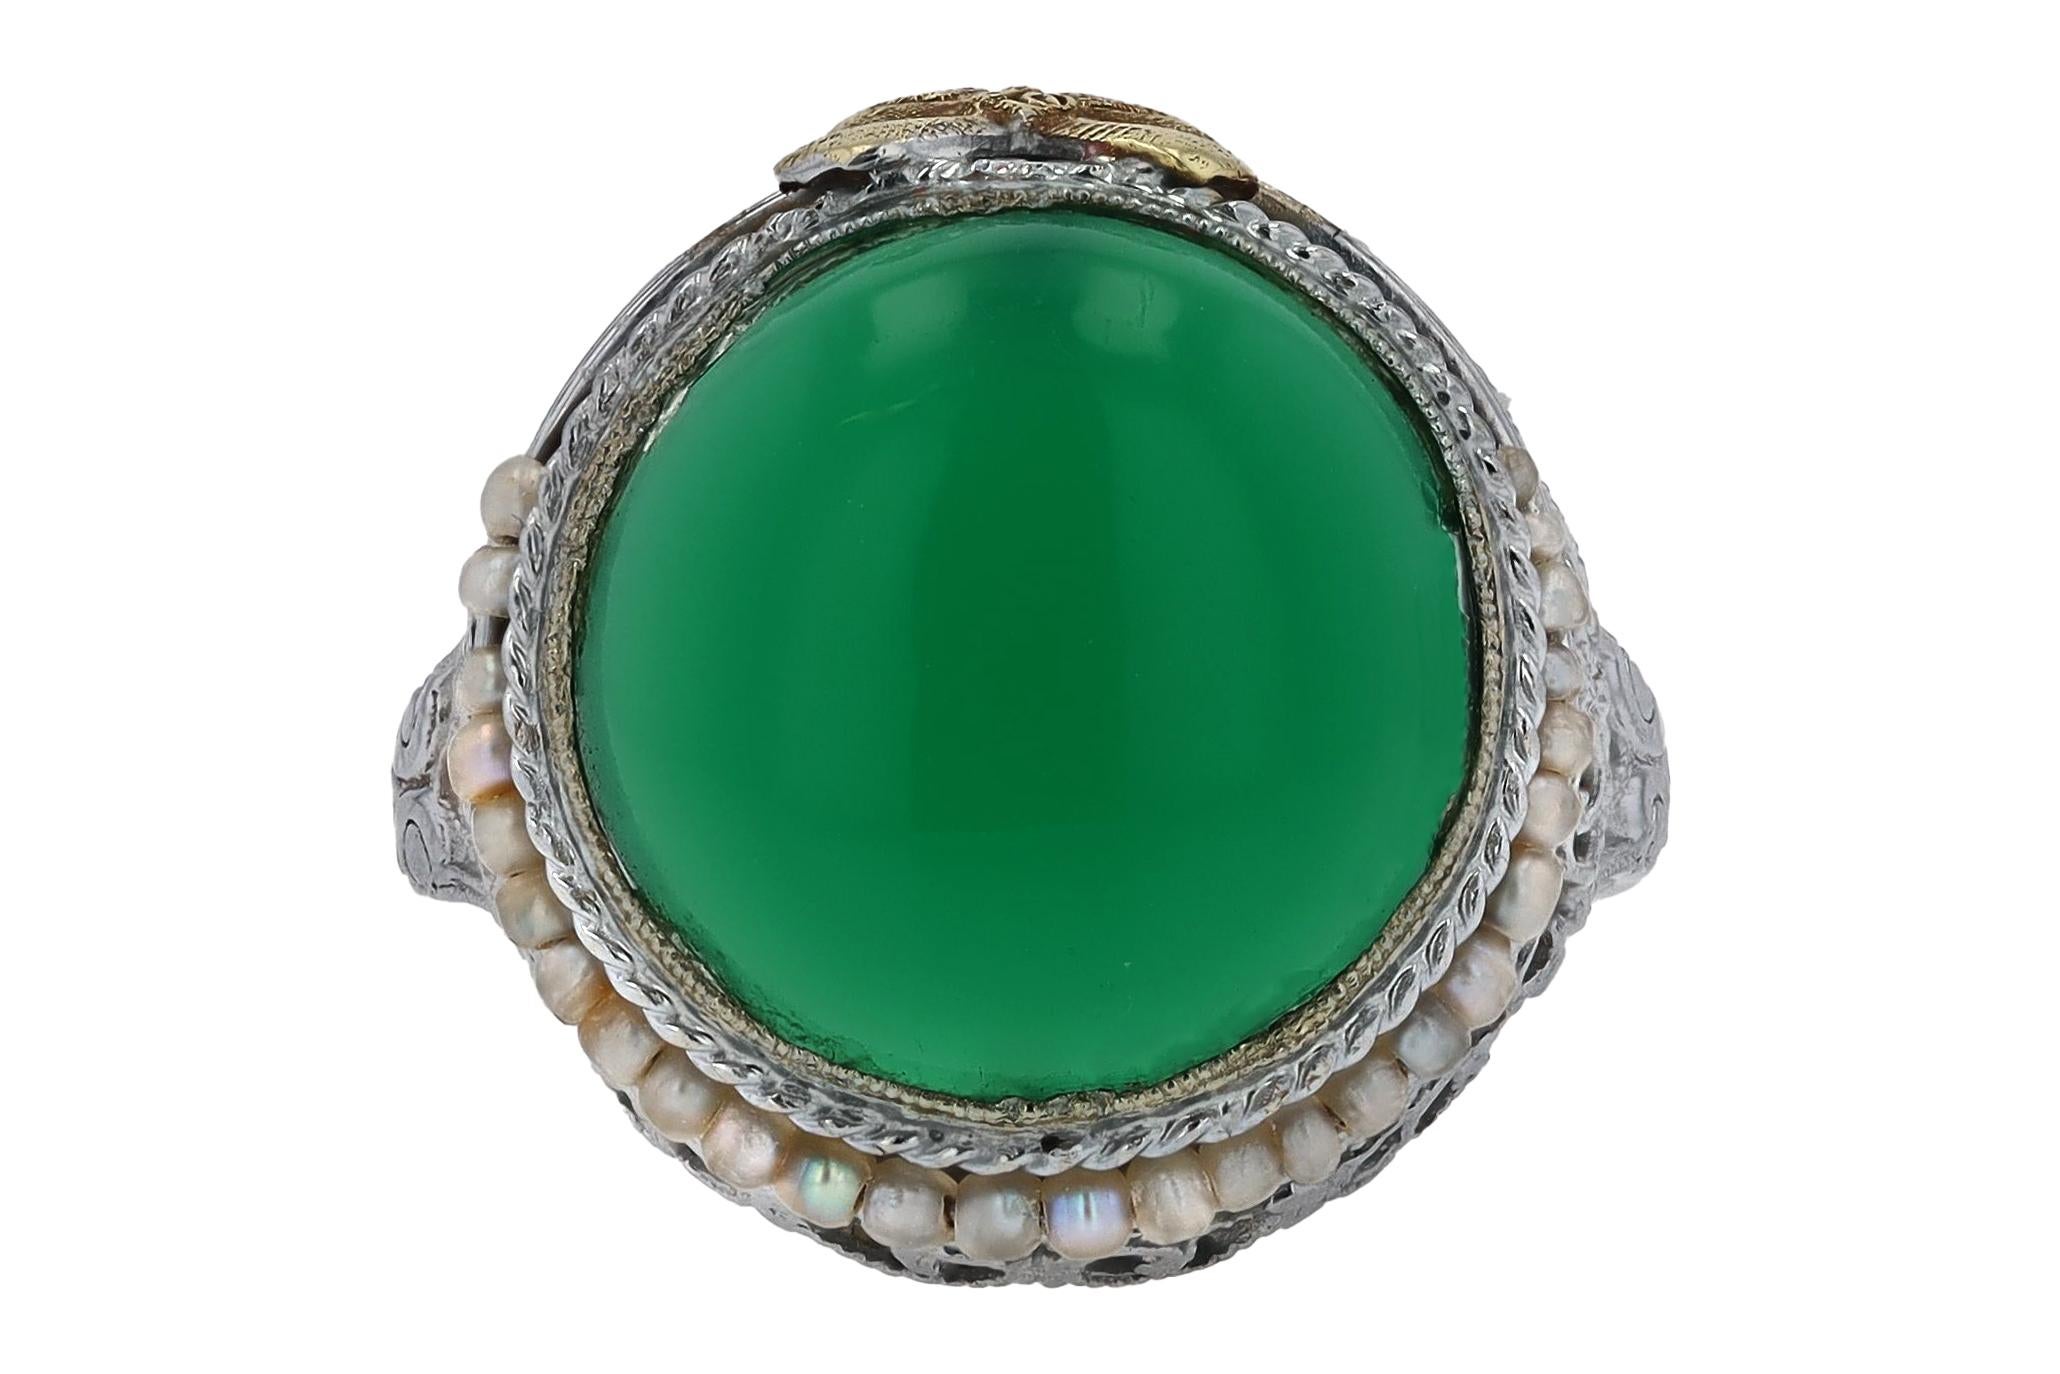 Antique Art Nouveau 4 Carat Chrysoprase Cocktail Ring In Good Condition For Sale In Santa Barbara, CA